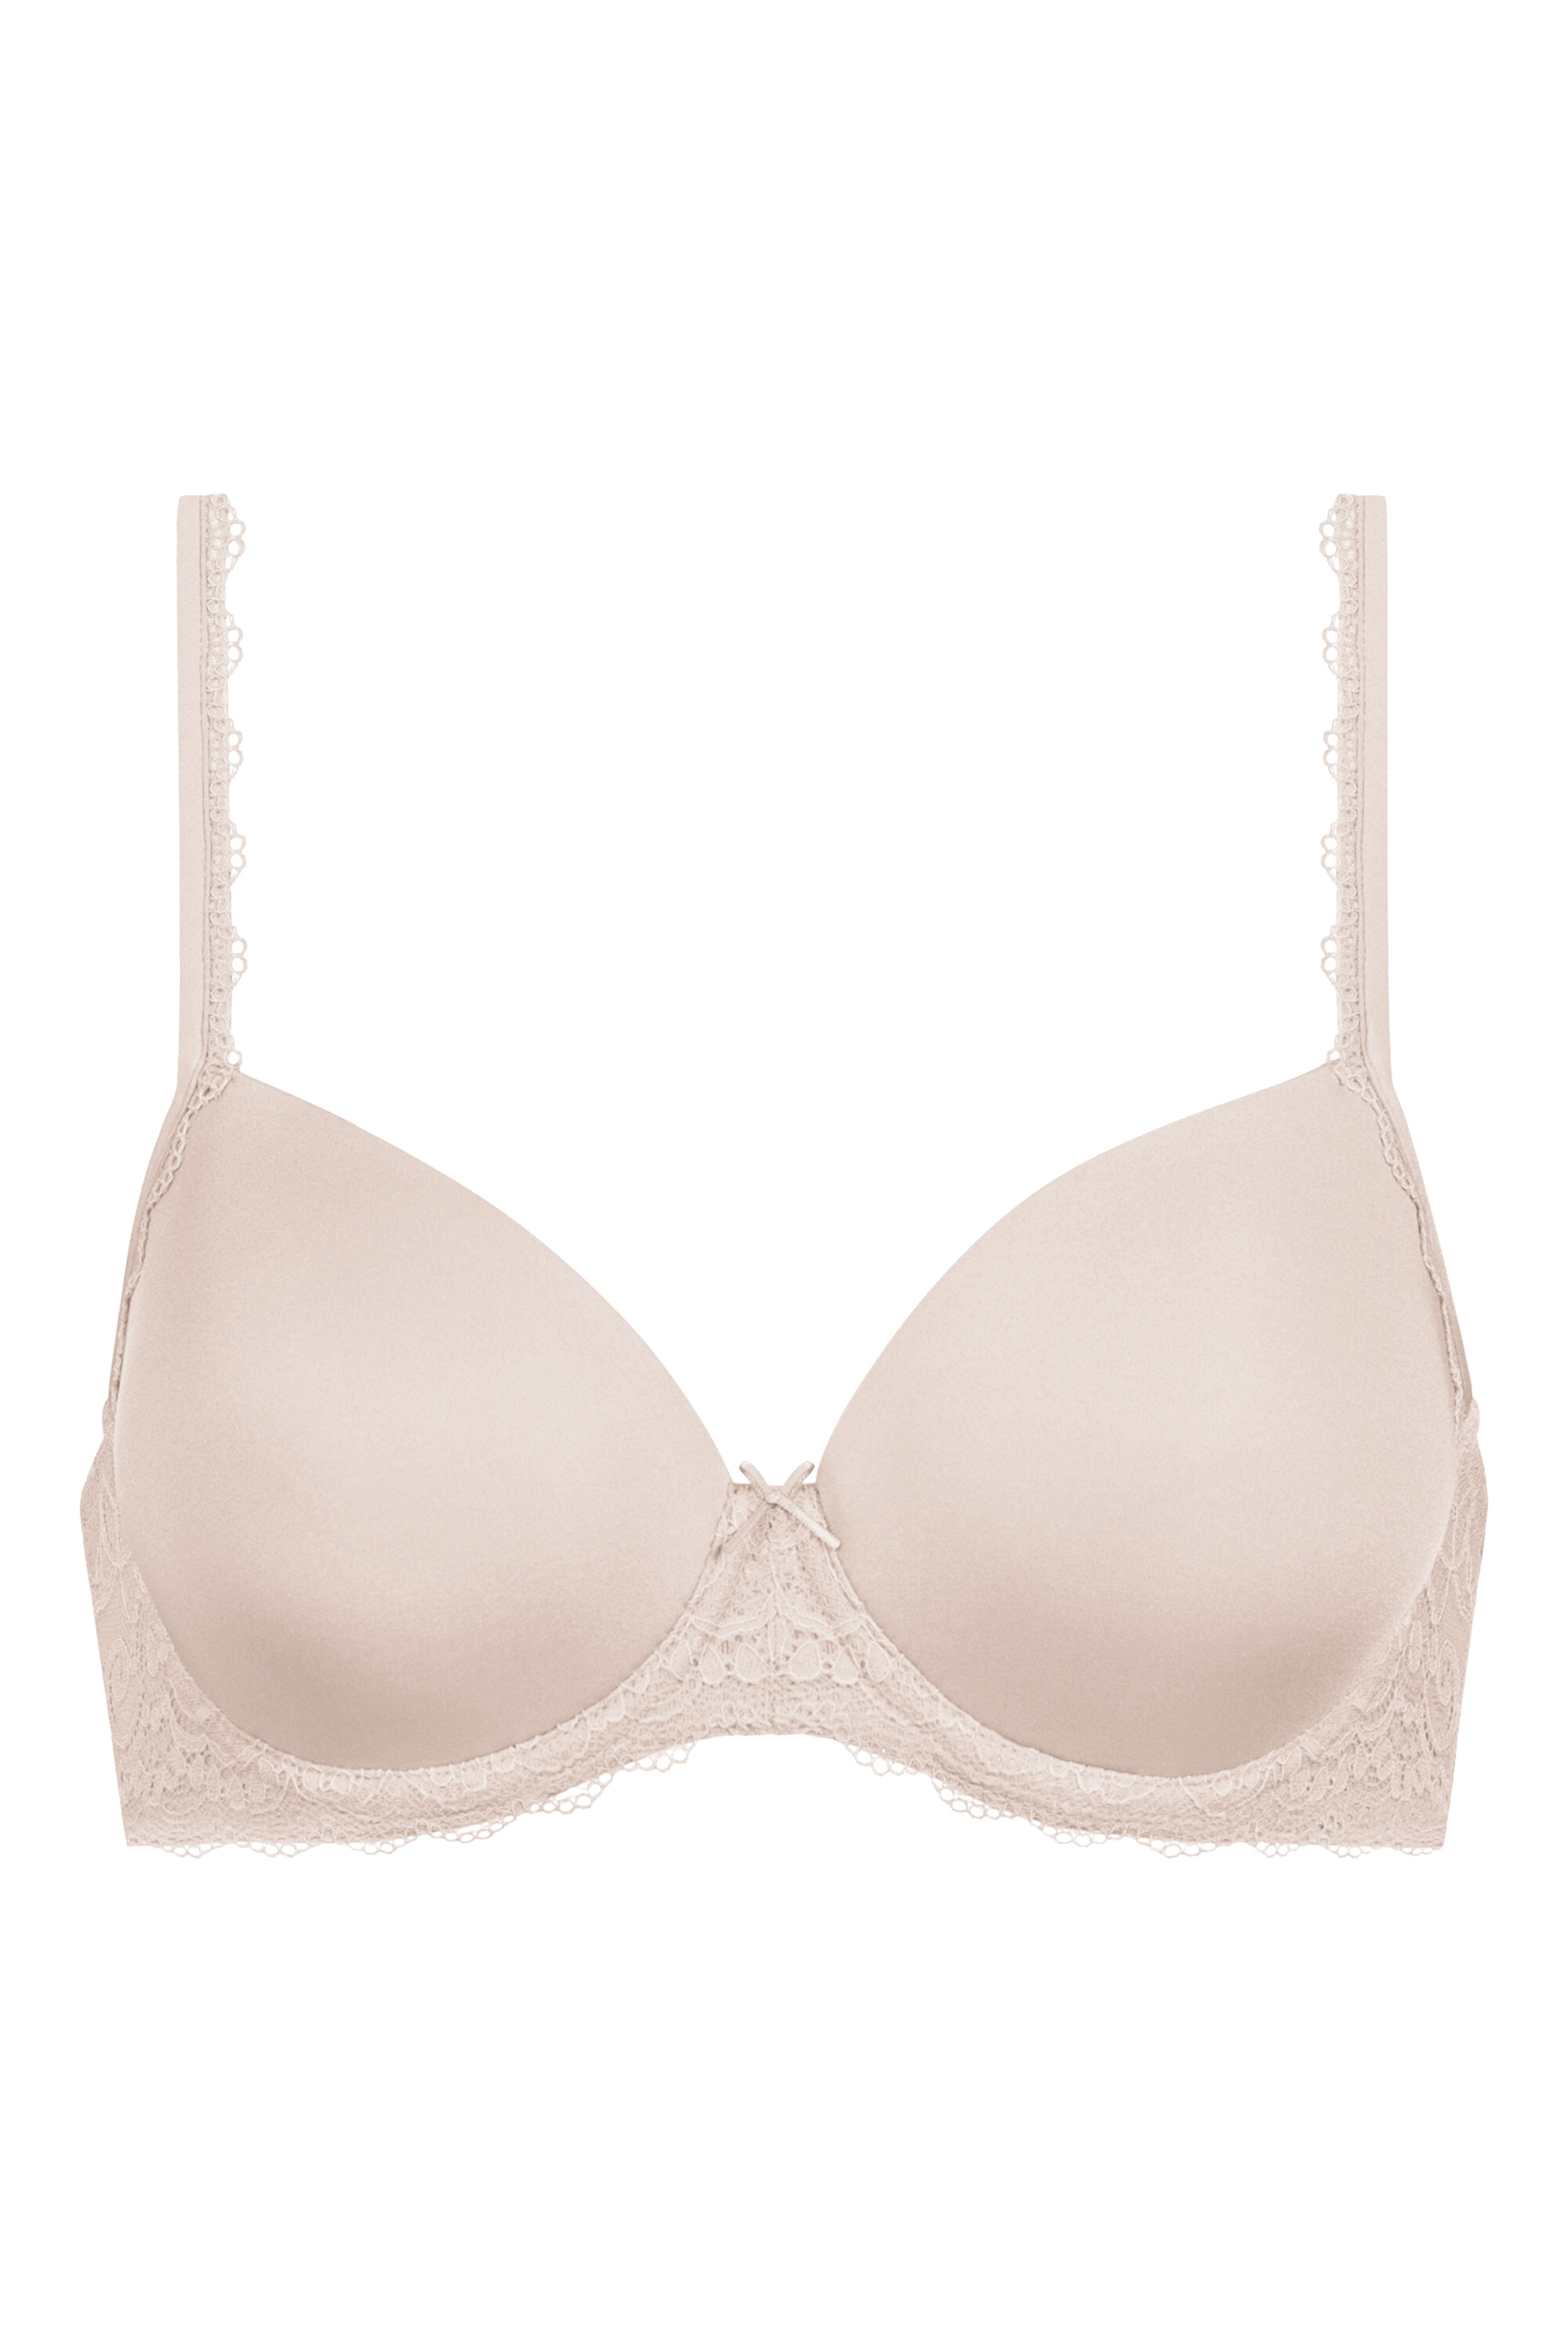 Bi-Stretch-BH | Full Cup Bailey Serie Amorous Uitknippen | mey®